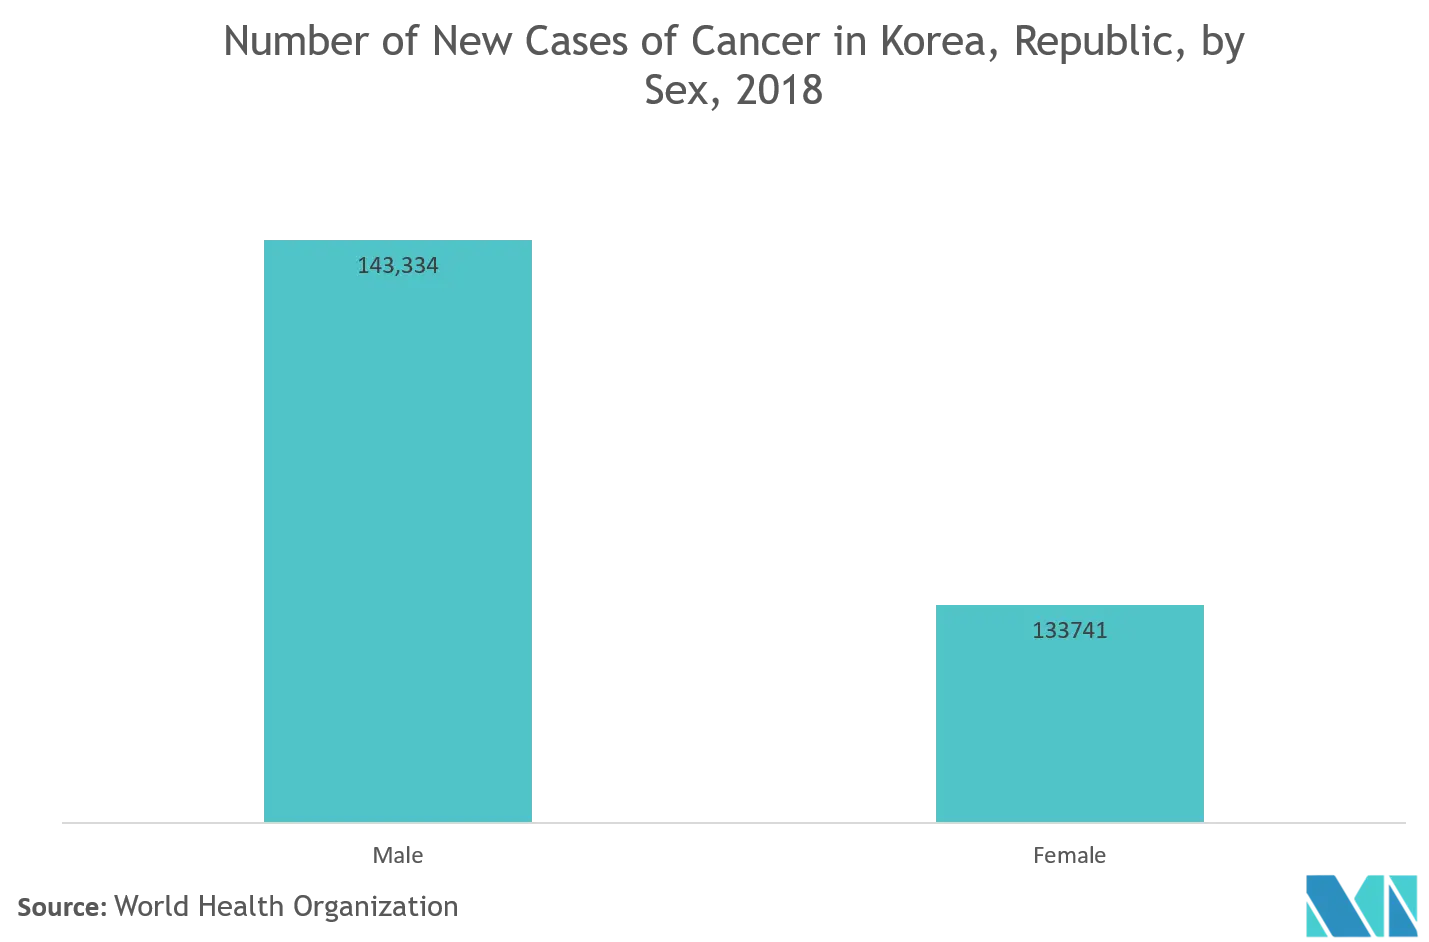 South Korea Nuclear Imaging Market Trends